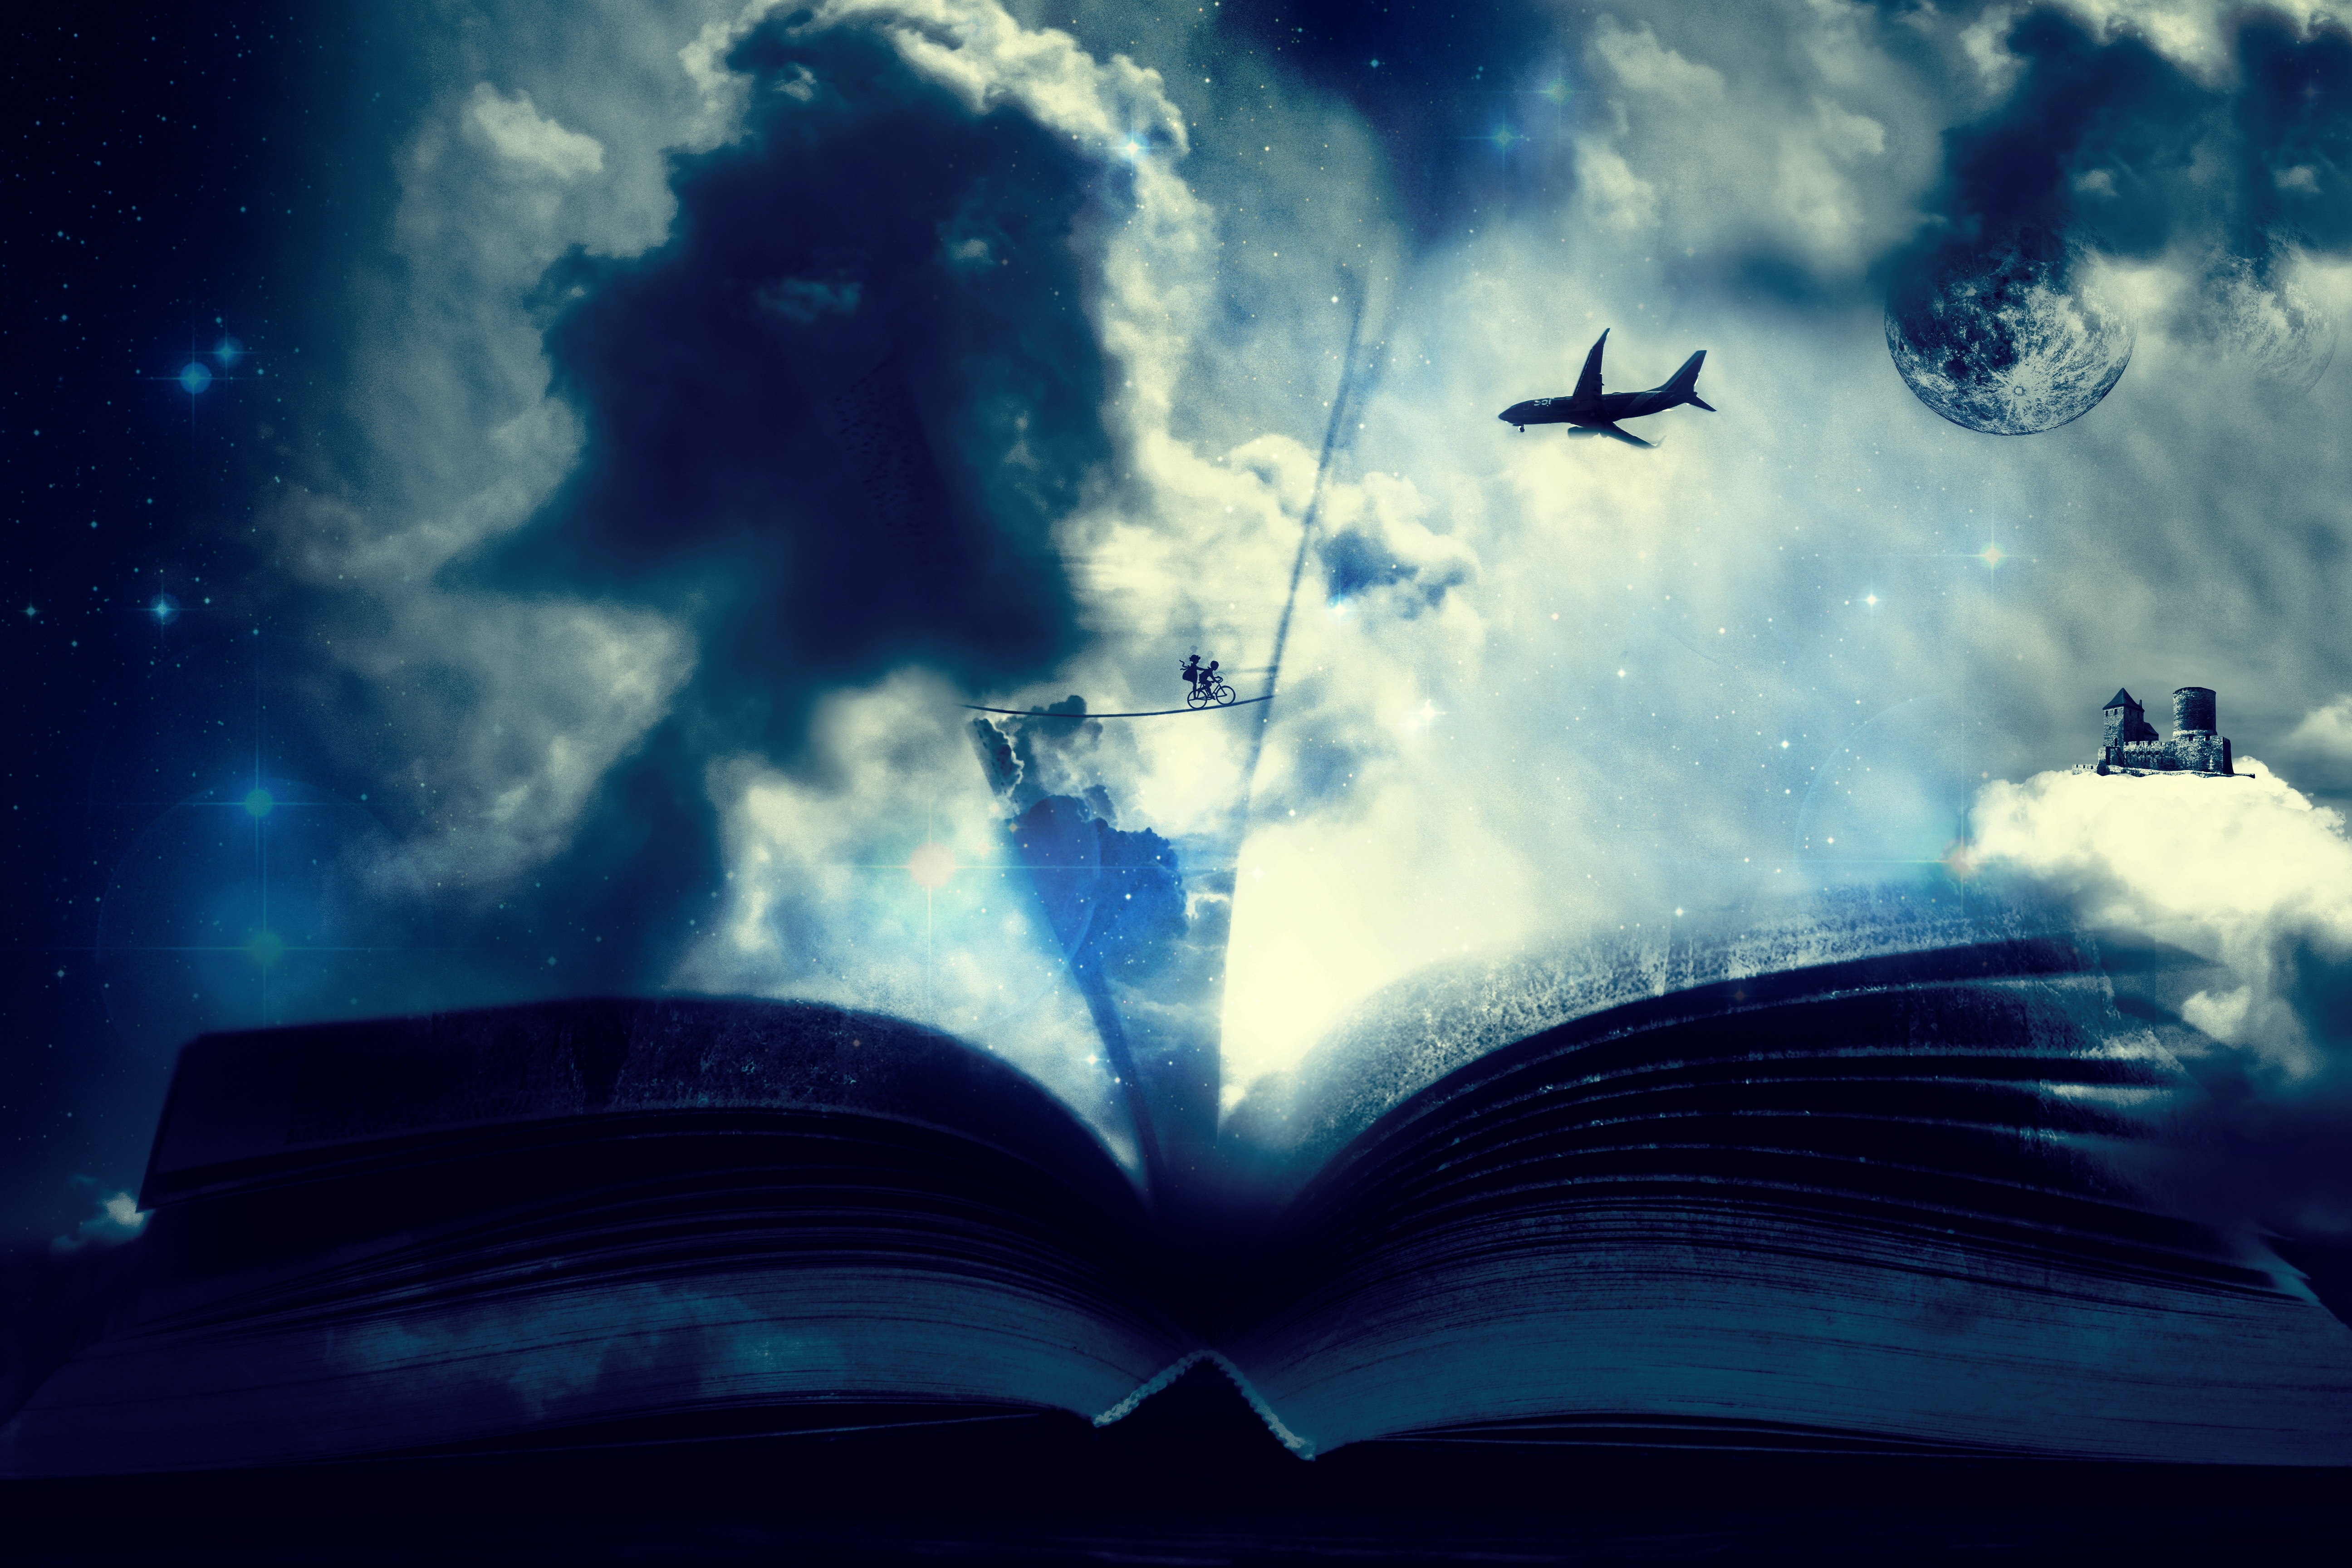 wallpapers book, plane, fantasy, art, clouds, airplane, bicycle